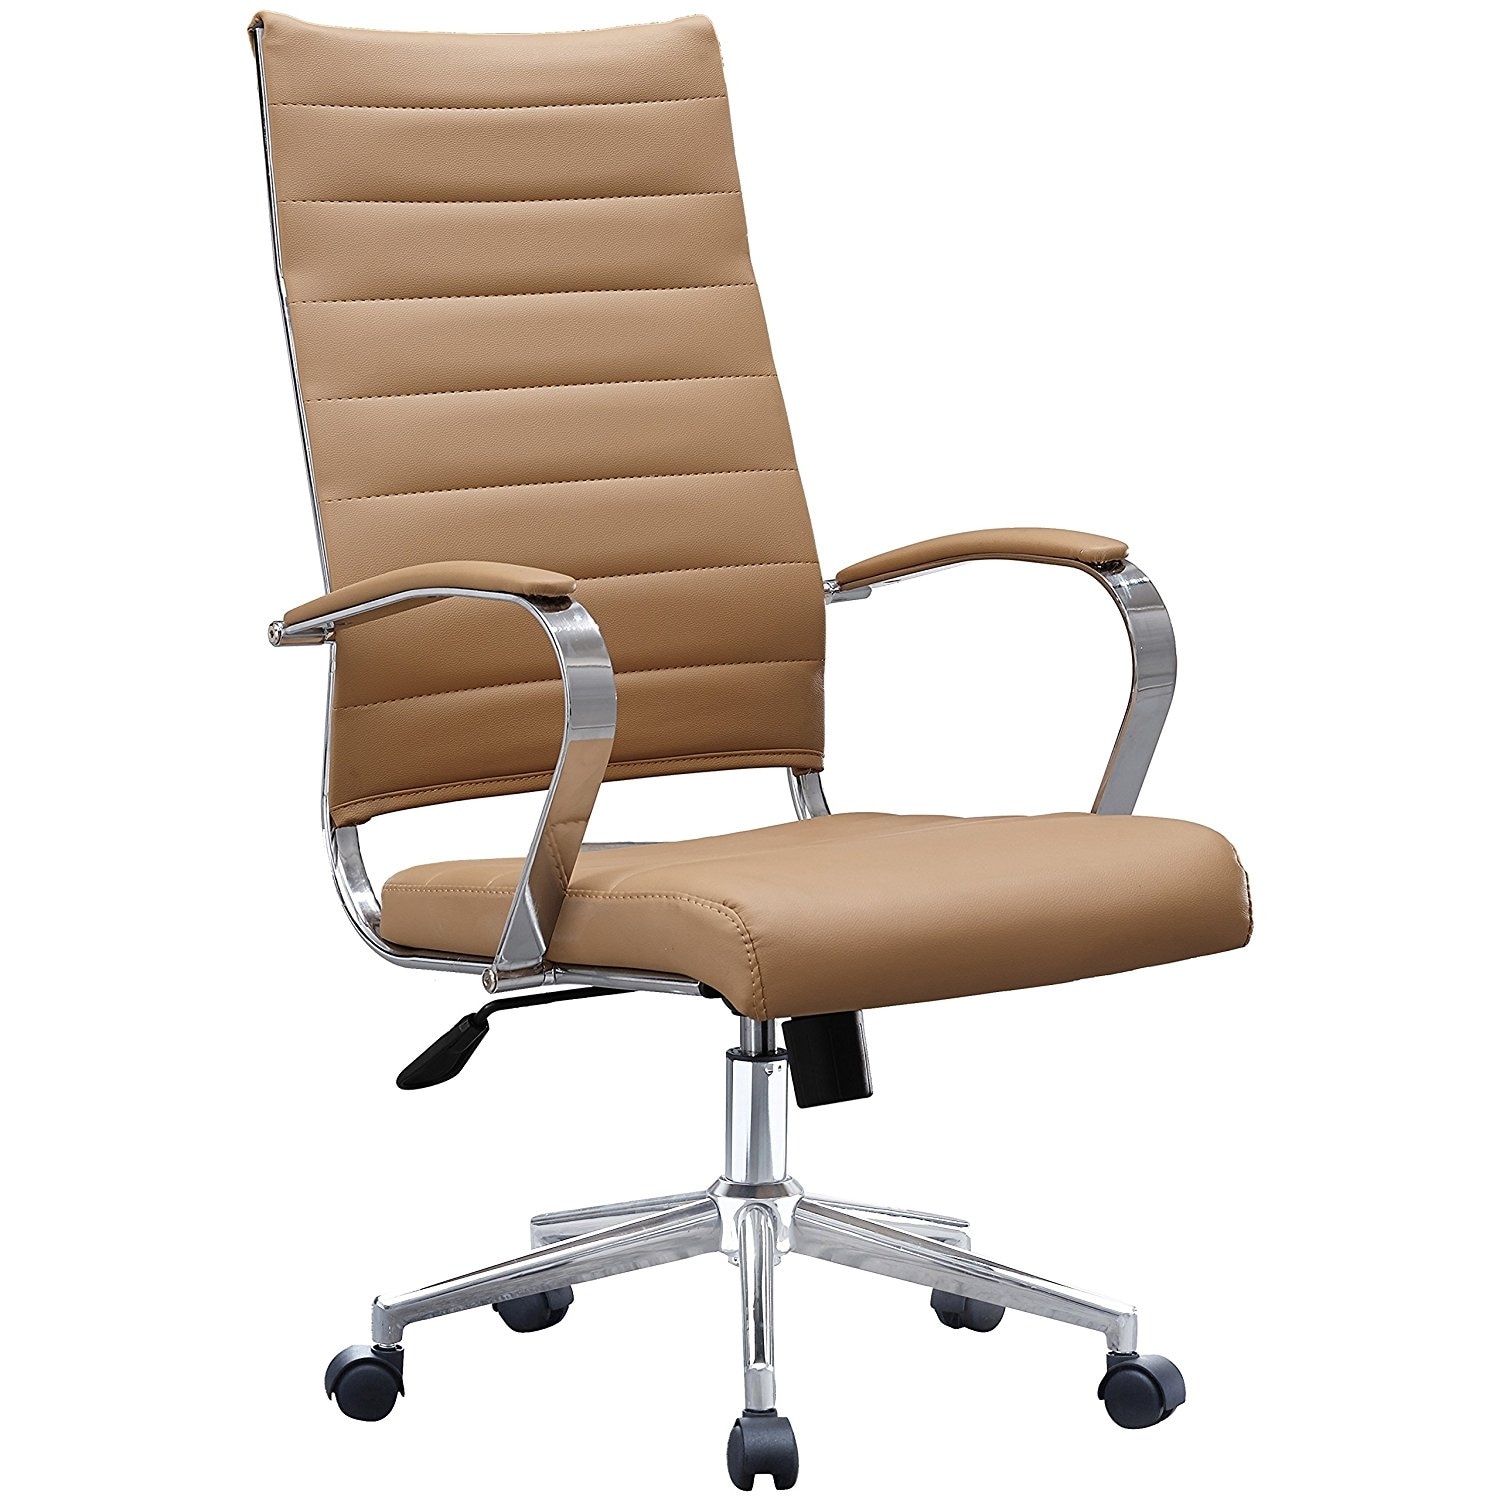 Mid-Back Home Office Desk Chair PU Padded - Beige